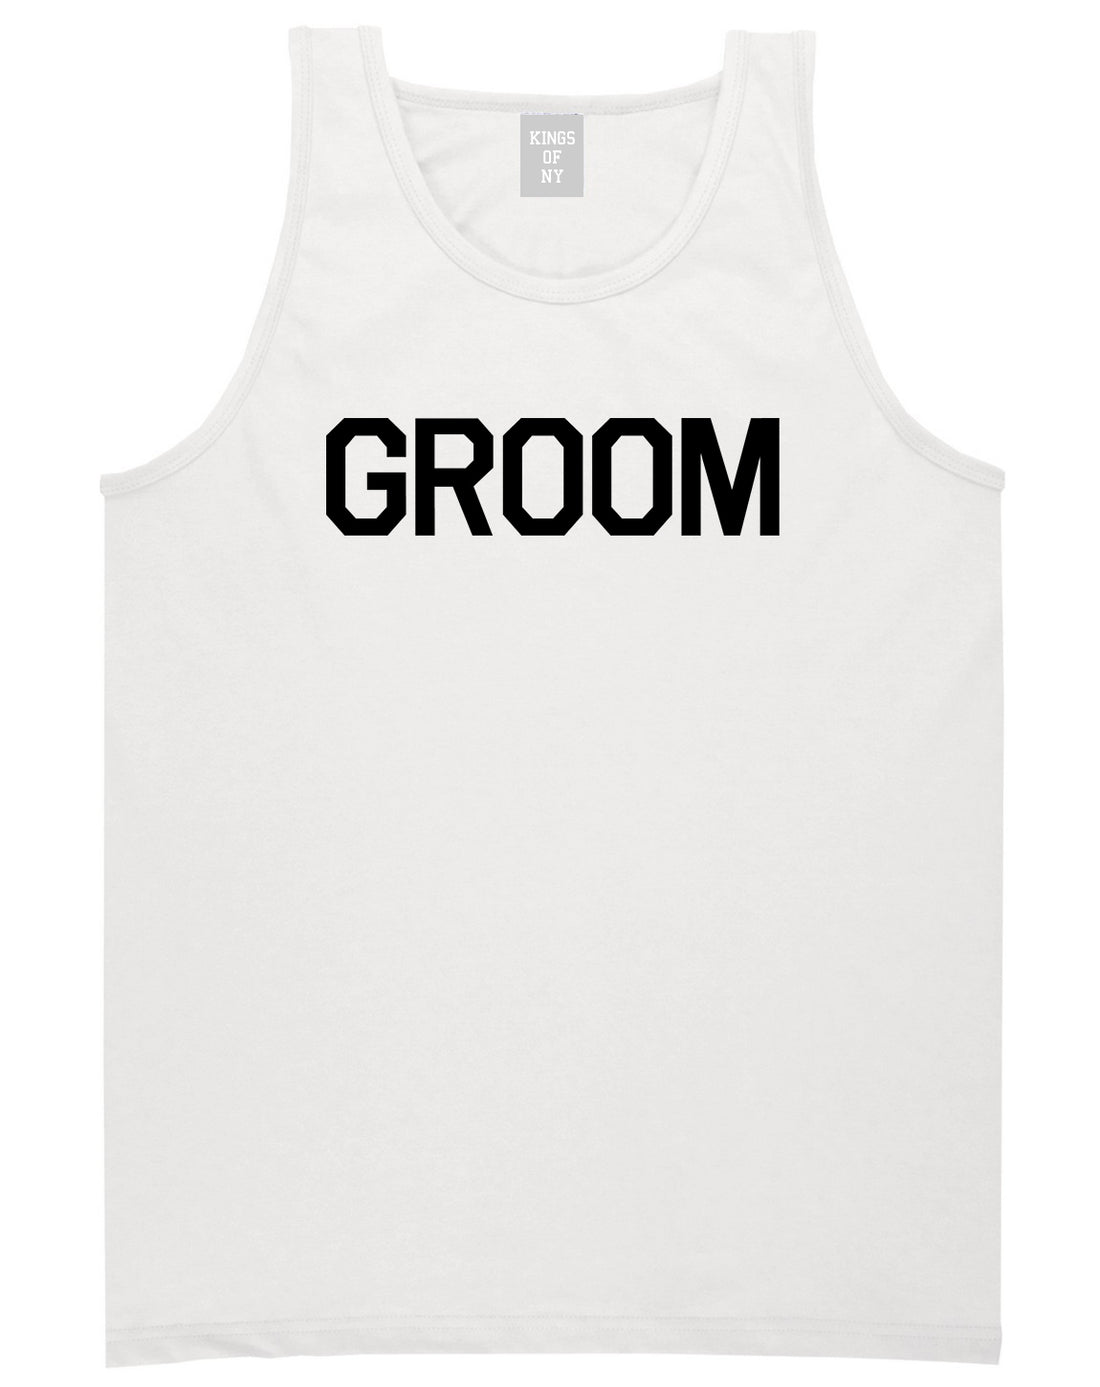 The Groom Bachelor Party White Tank Top Shirt by Kings Of NY